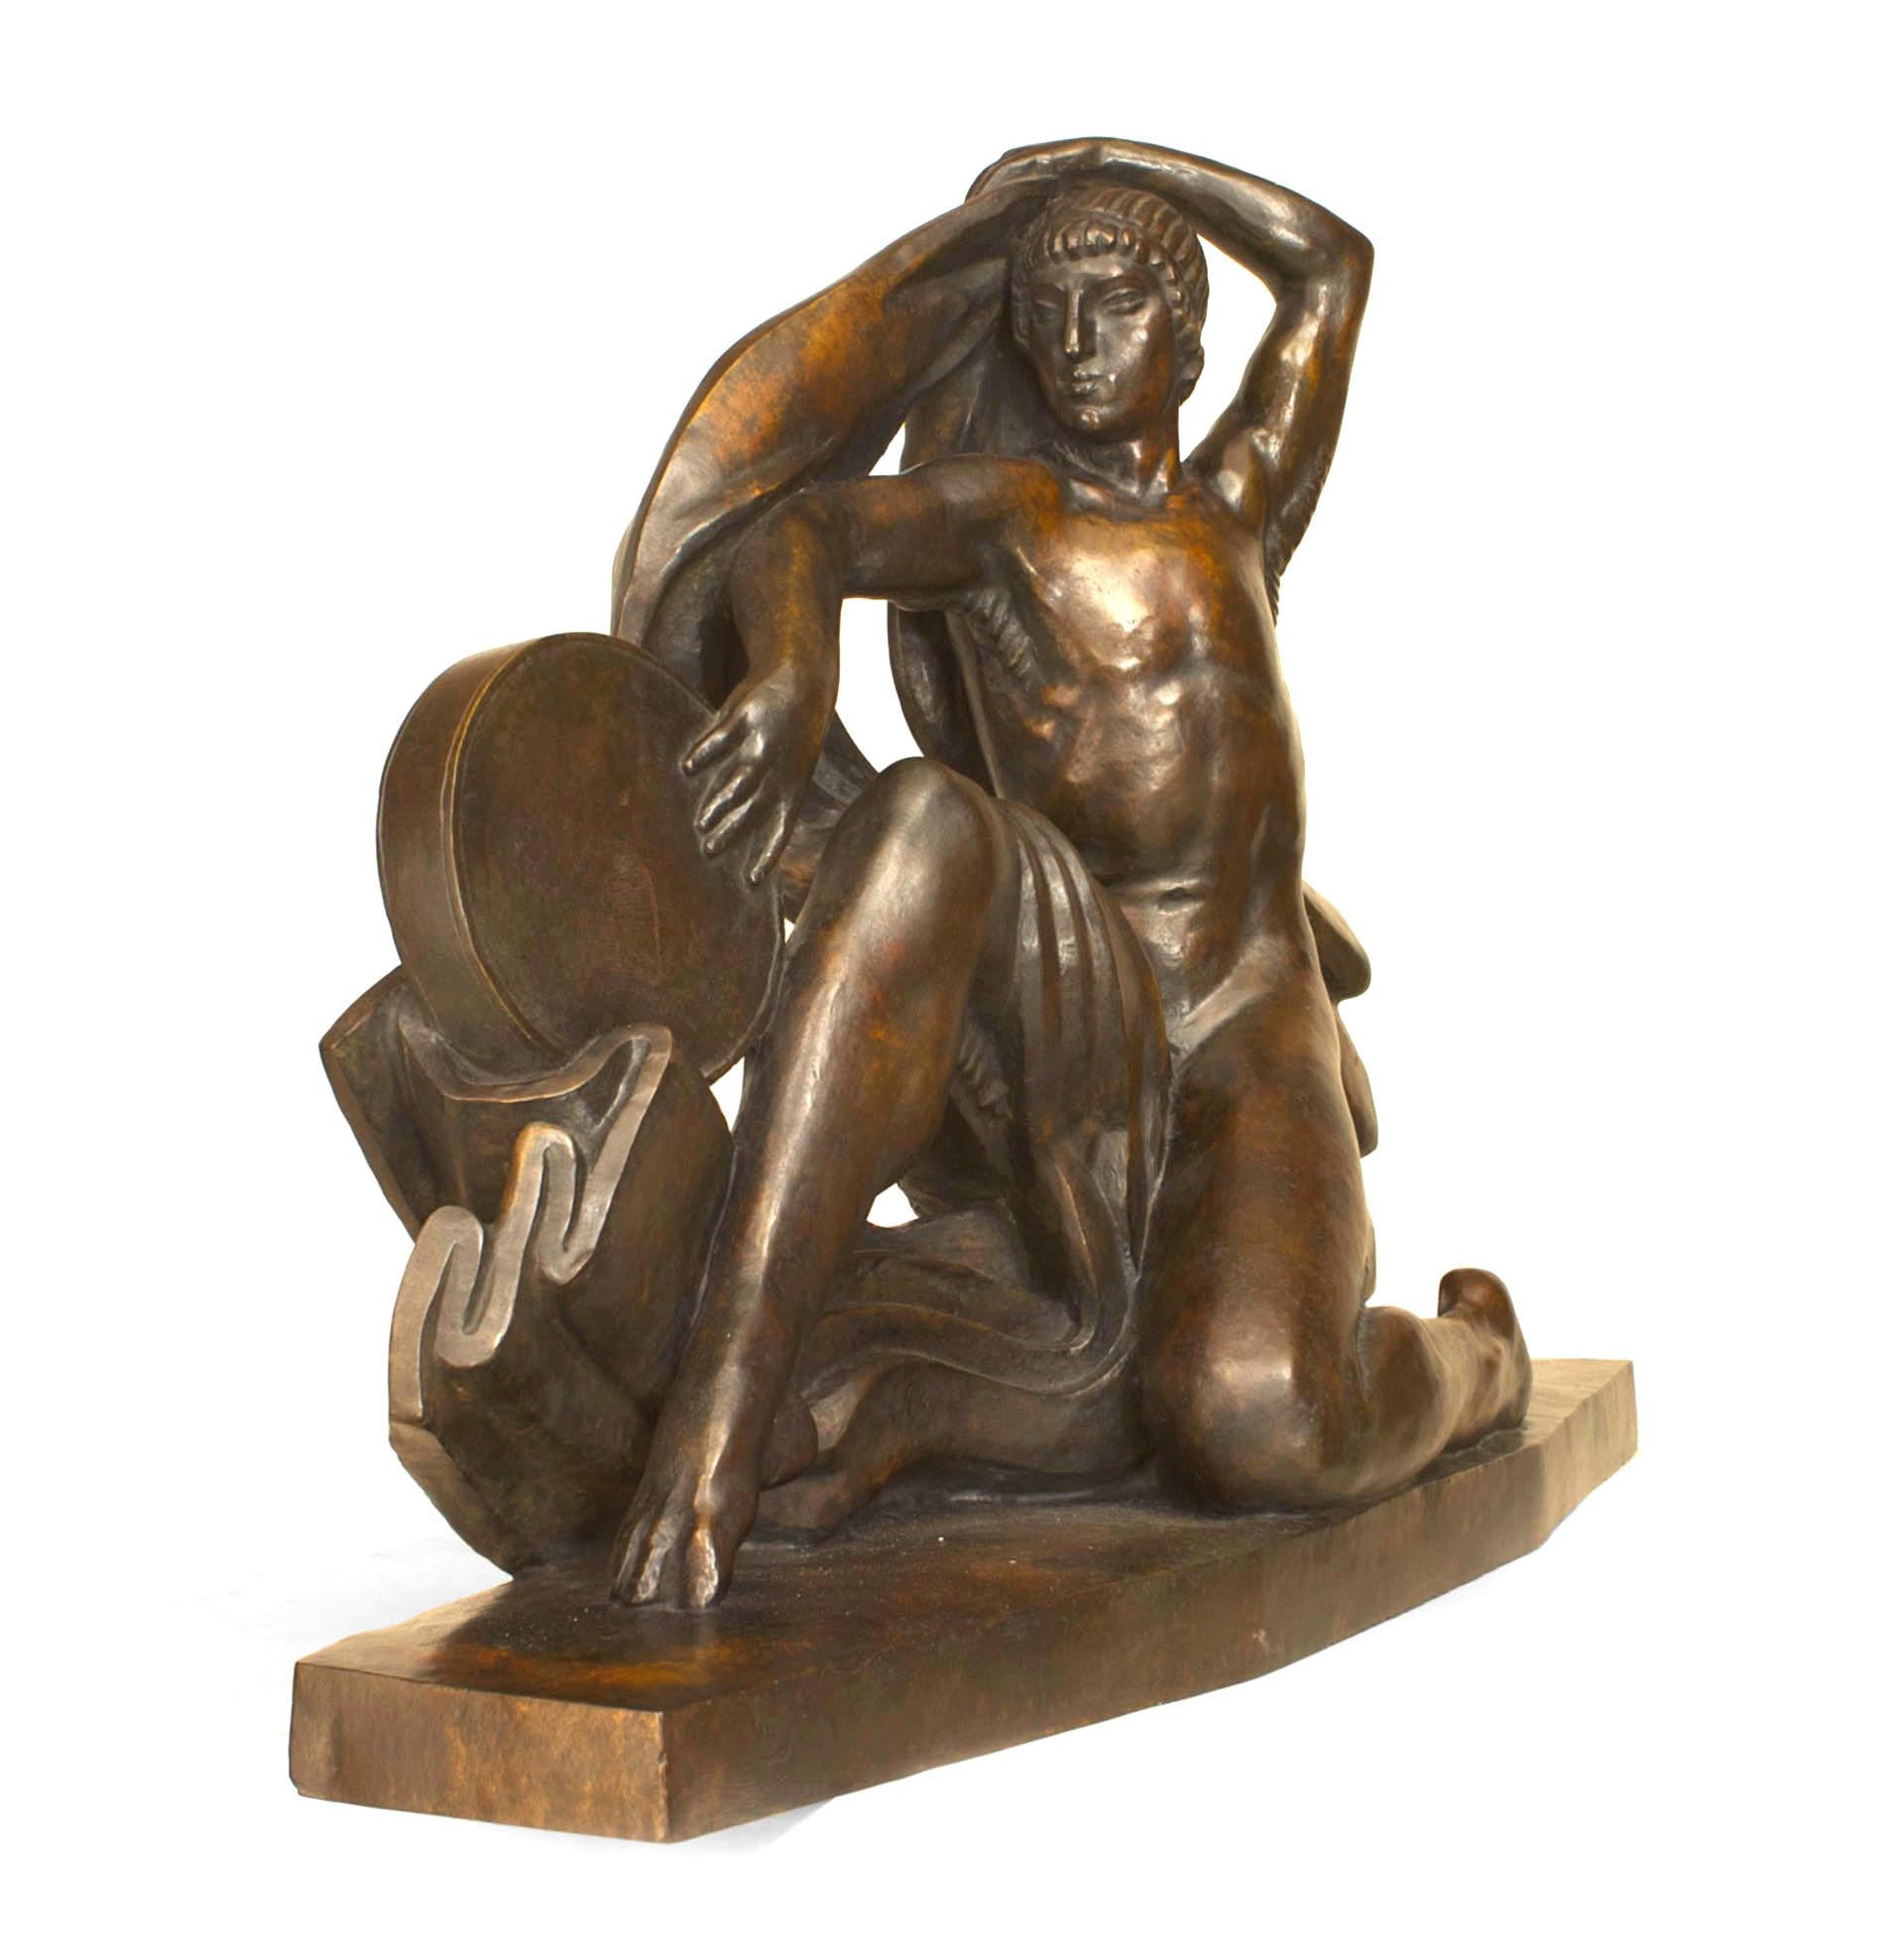 French Art Deco bronze sculpture of a figure on bent knee holding a tambourine and a flowing drape (signed: MARCEL RENARD 1925, titled: 